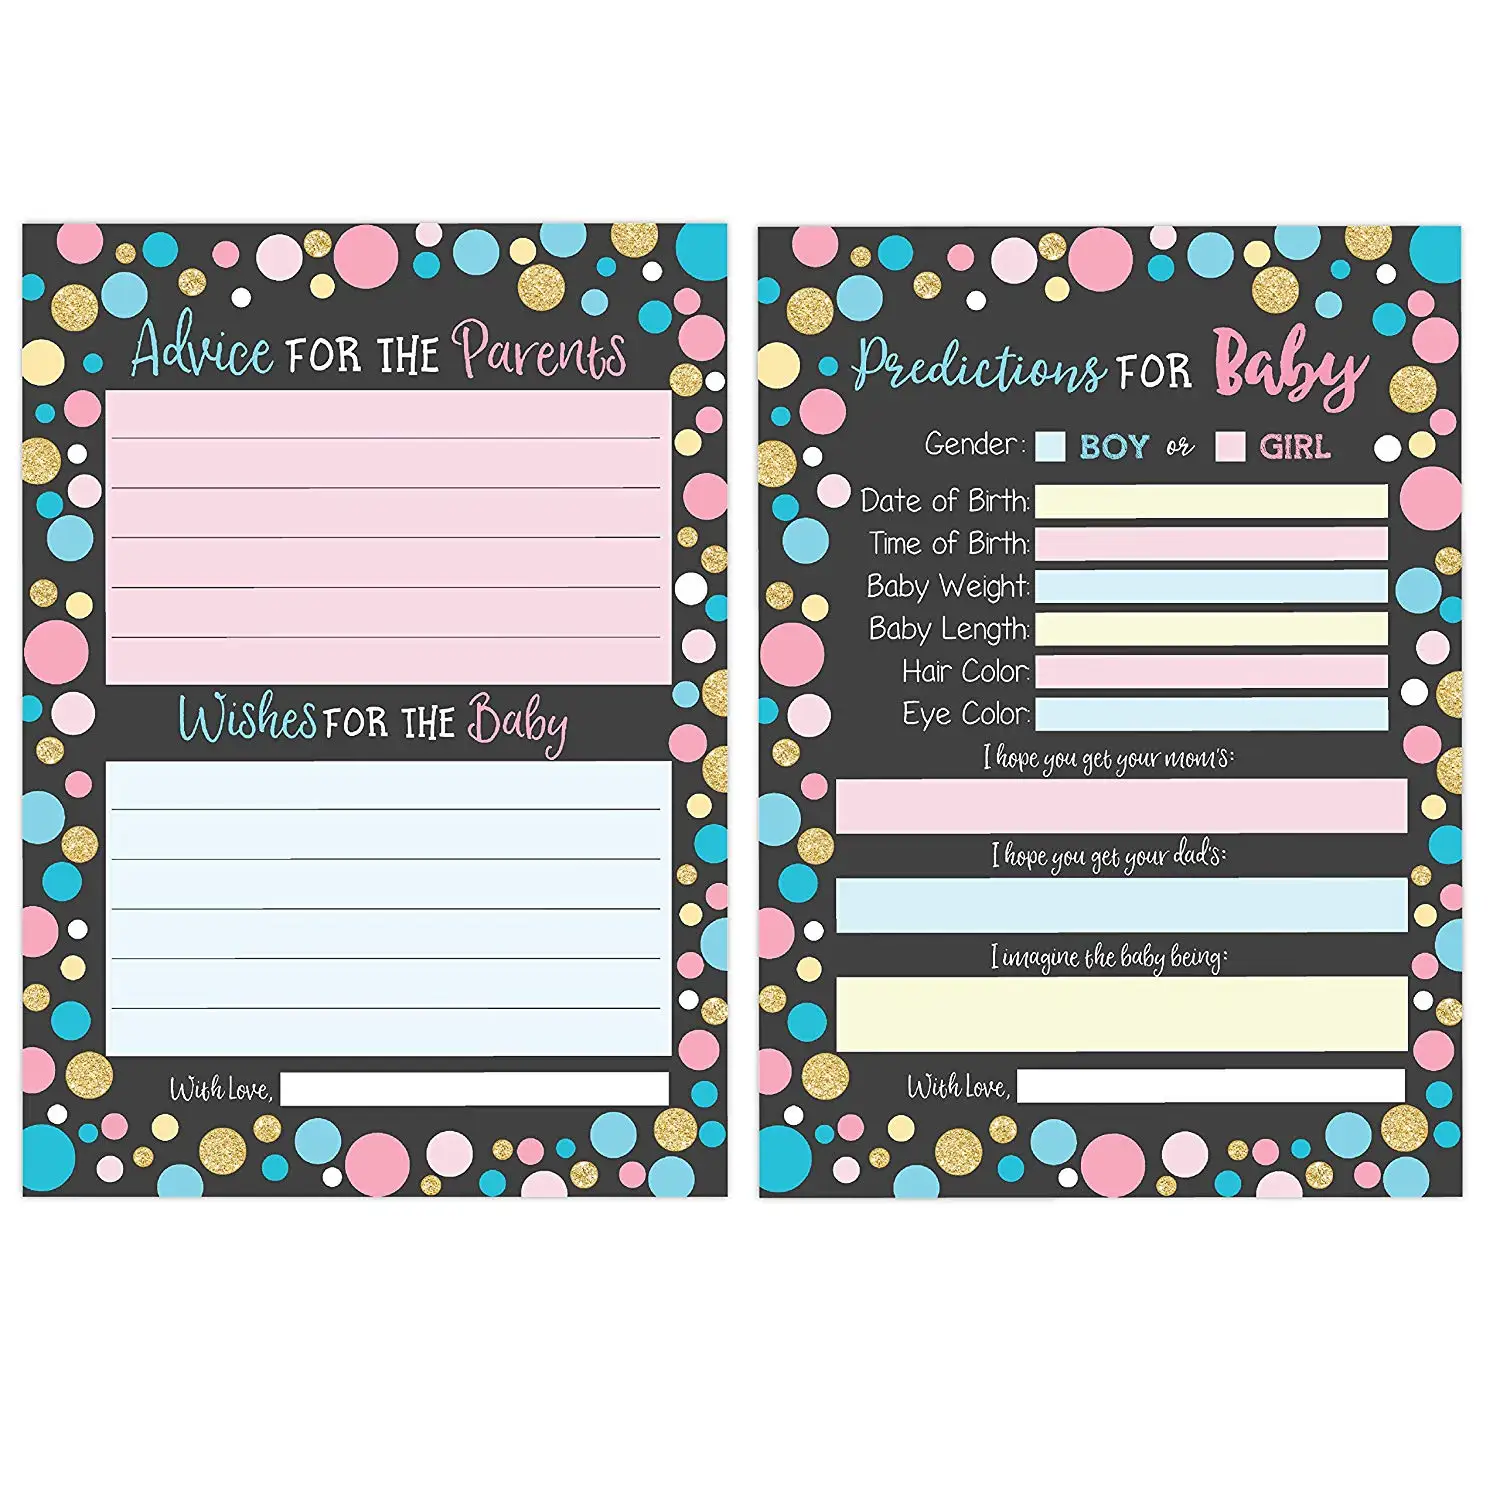 buy-baby-shower-prediction-cards-advice-cards-gender-reveal-prediction-cards-wishes-for-baby